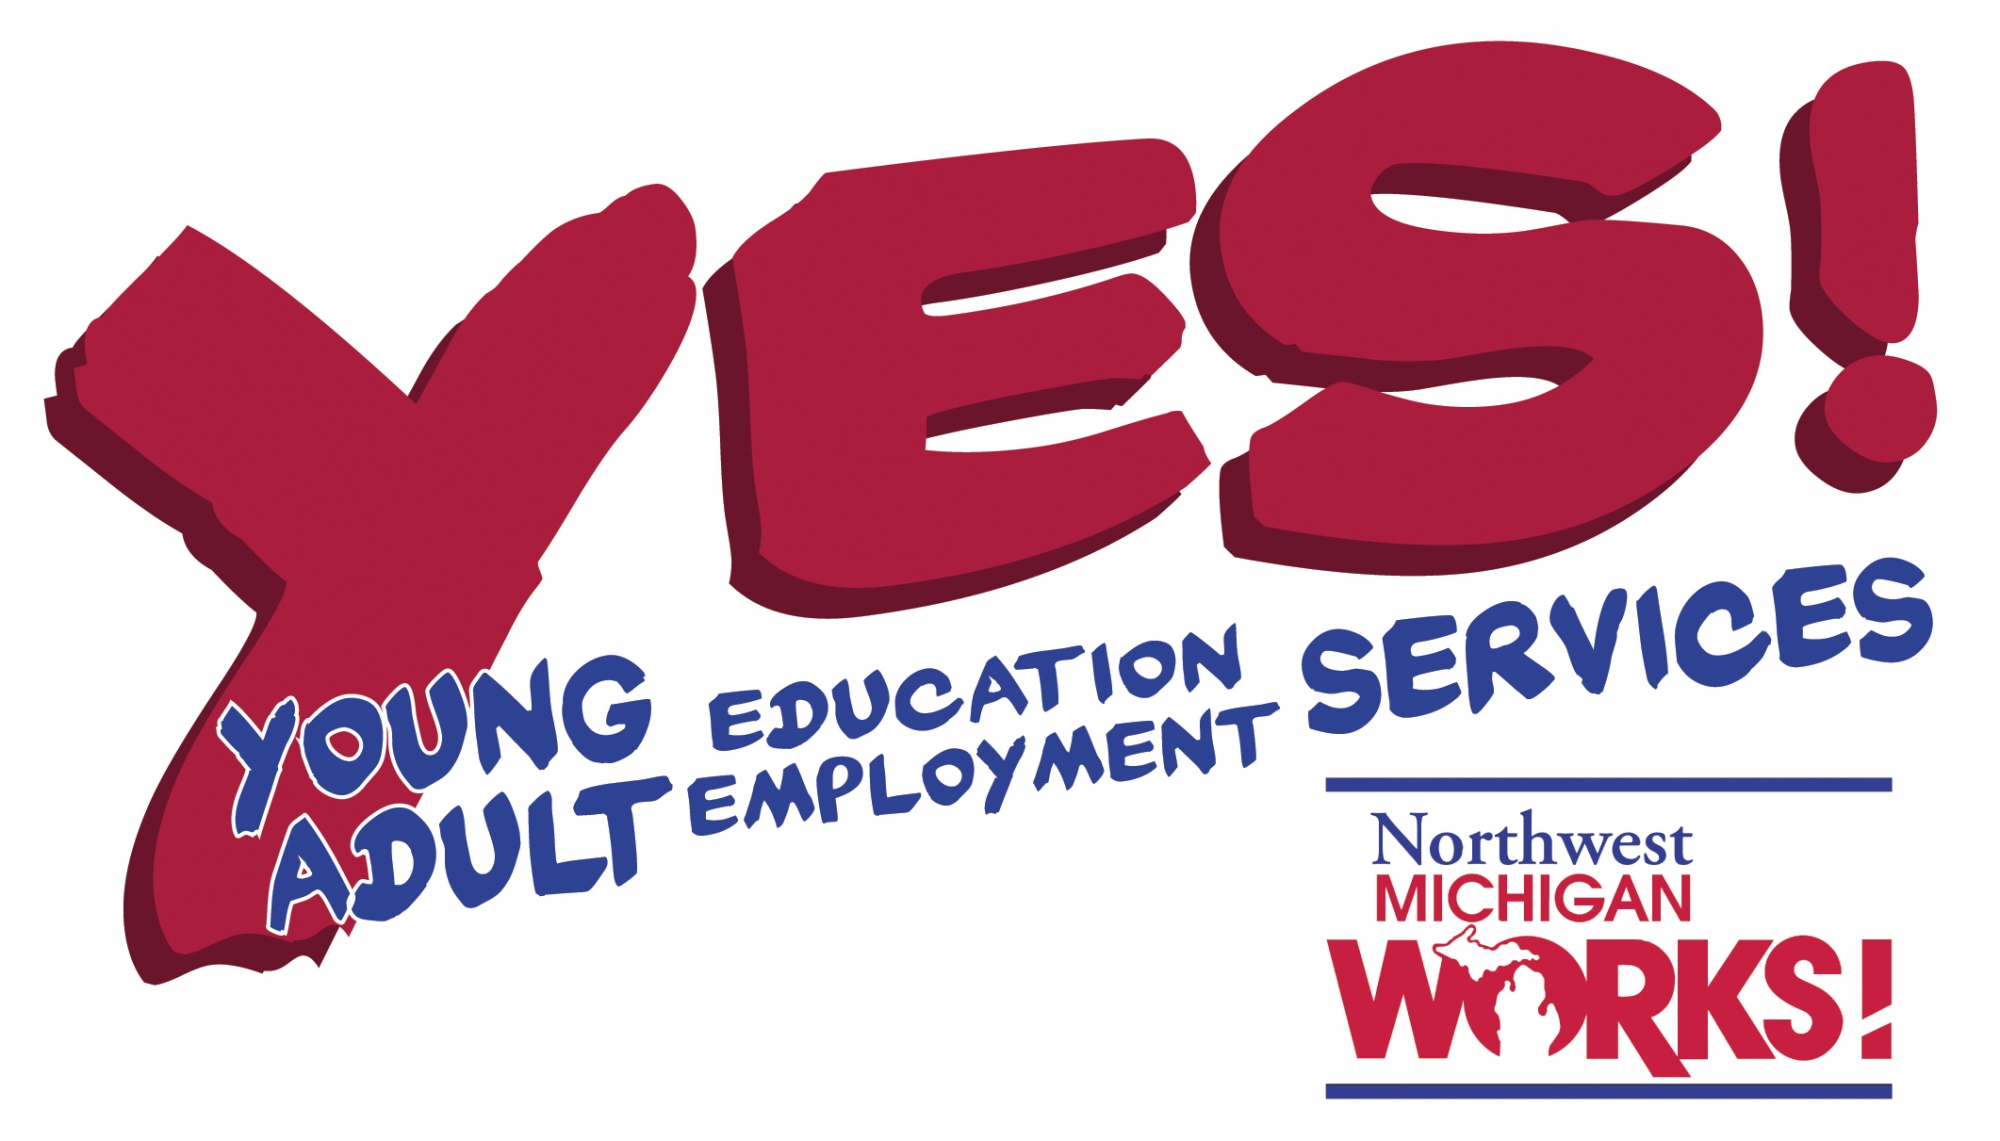 YES: Young Adult Education Employment Services